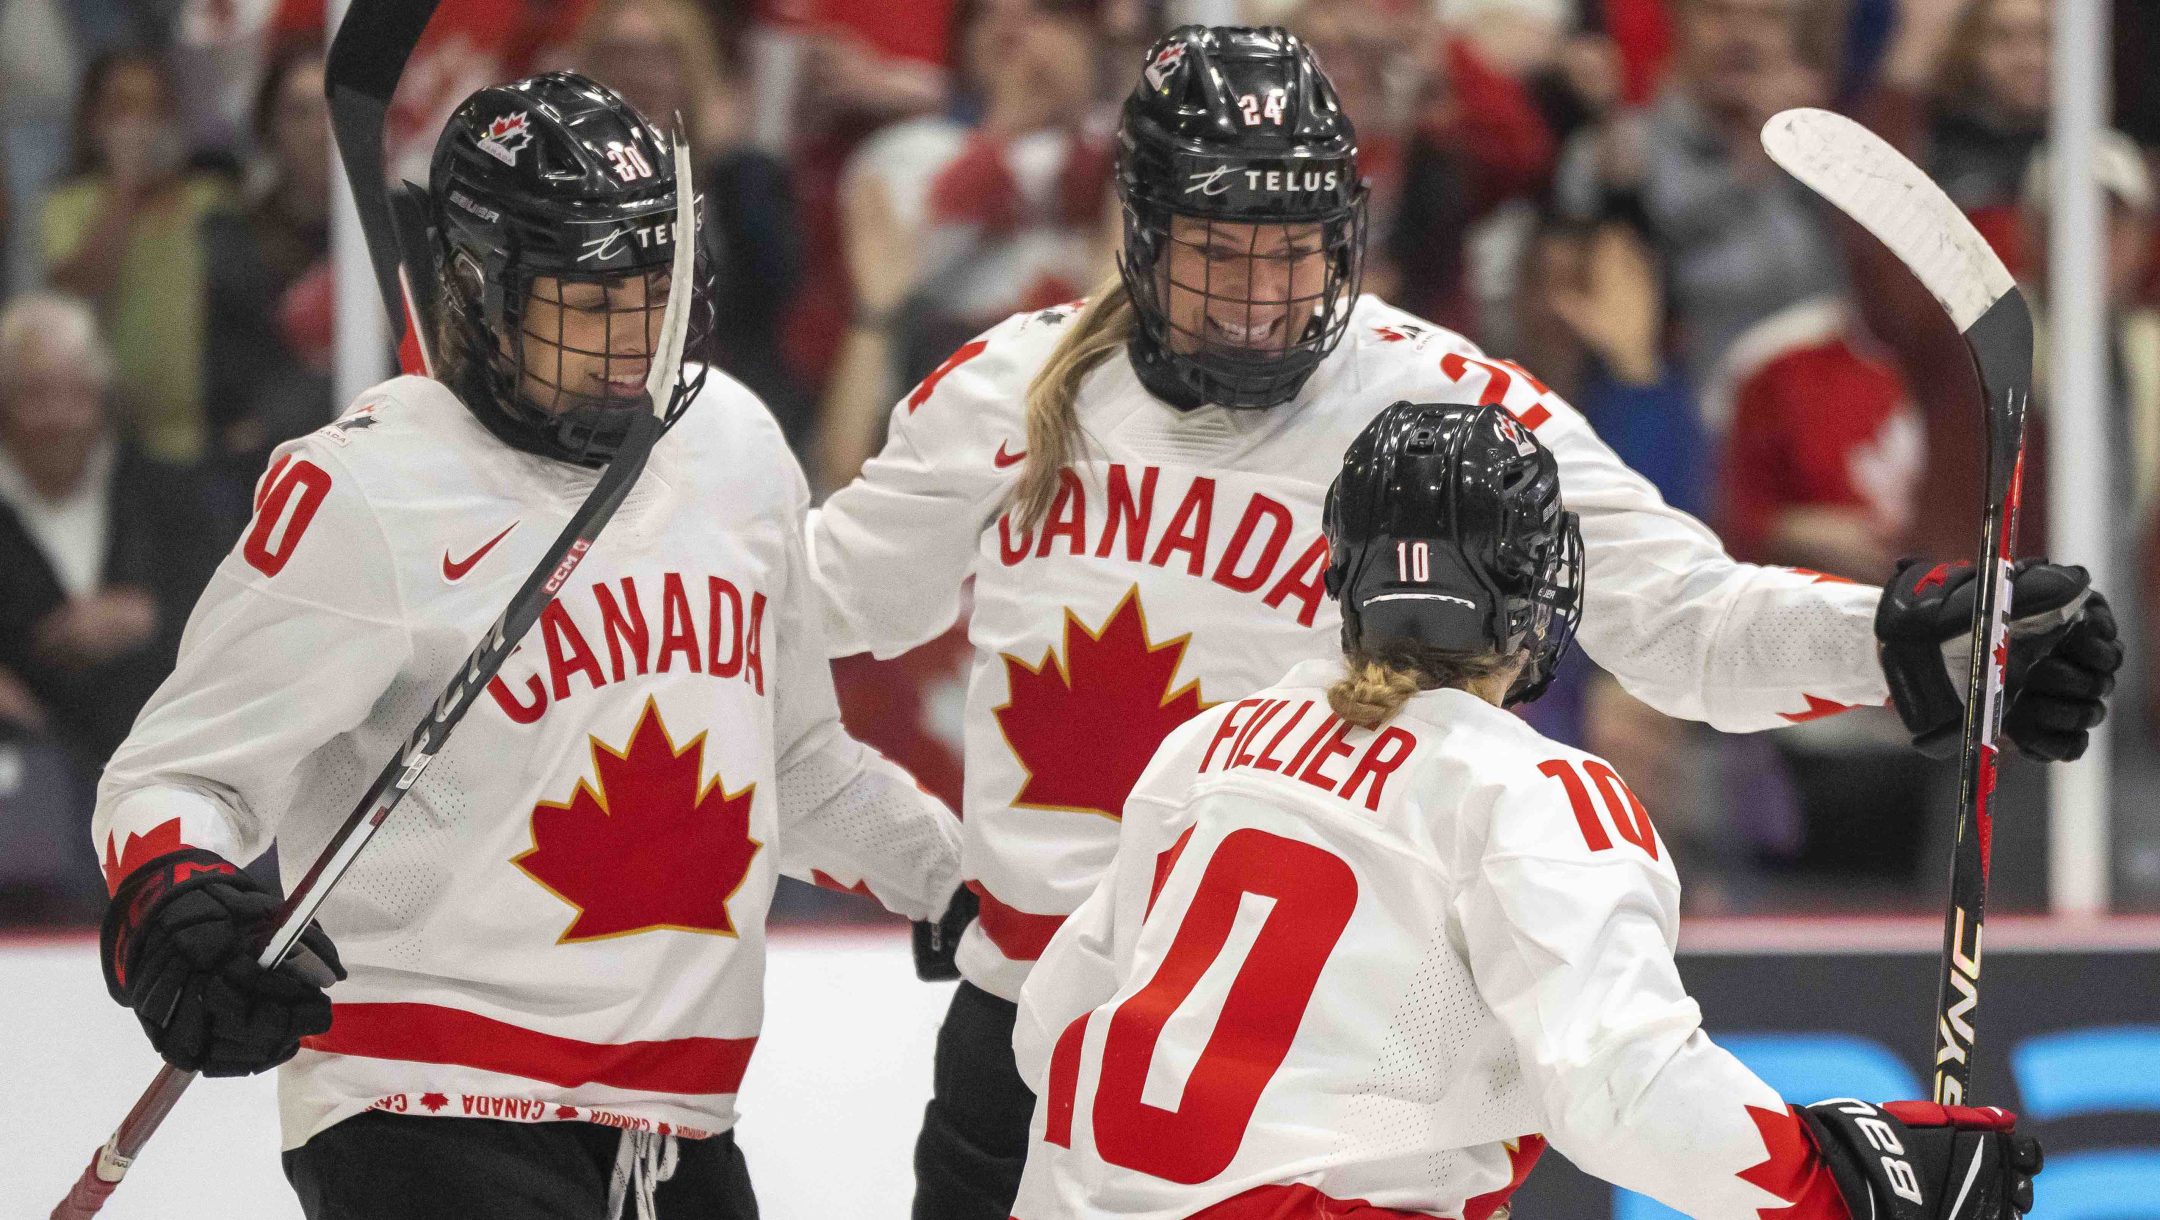 Team Canada to play for gold at IIHF Womens World Championship - Team Canada